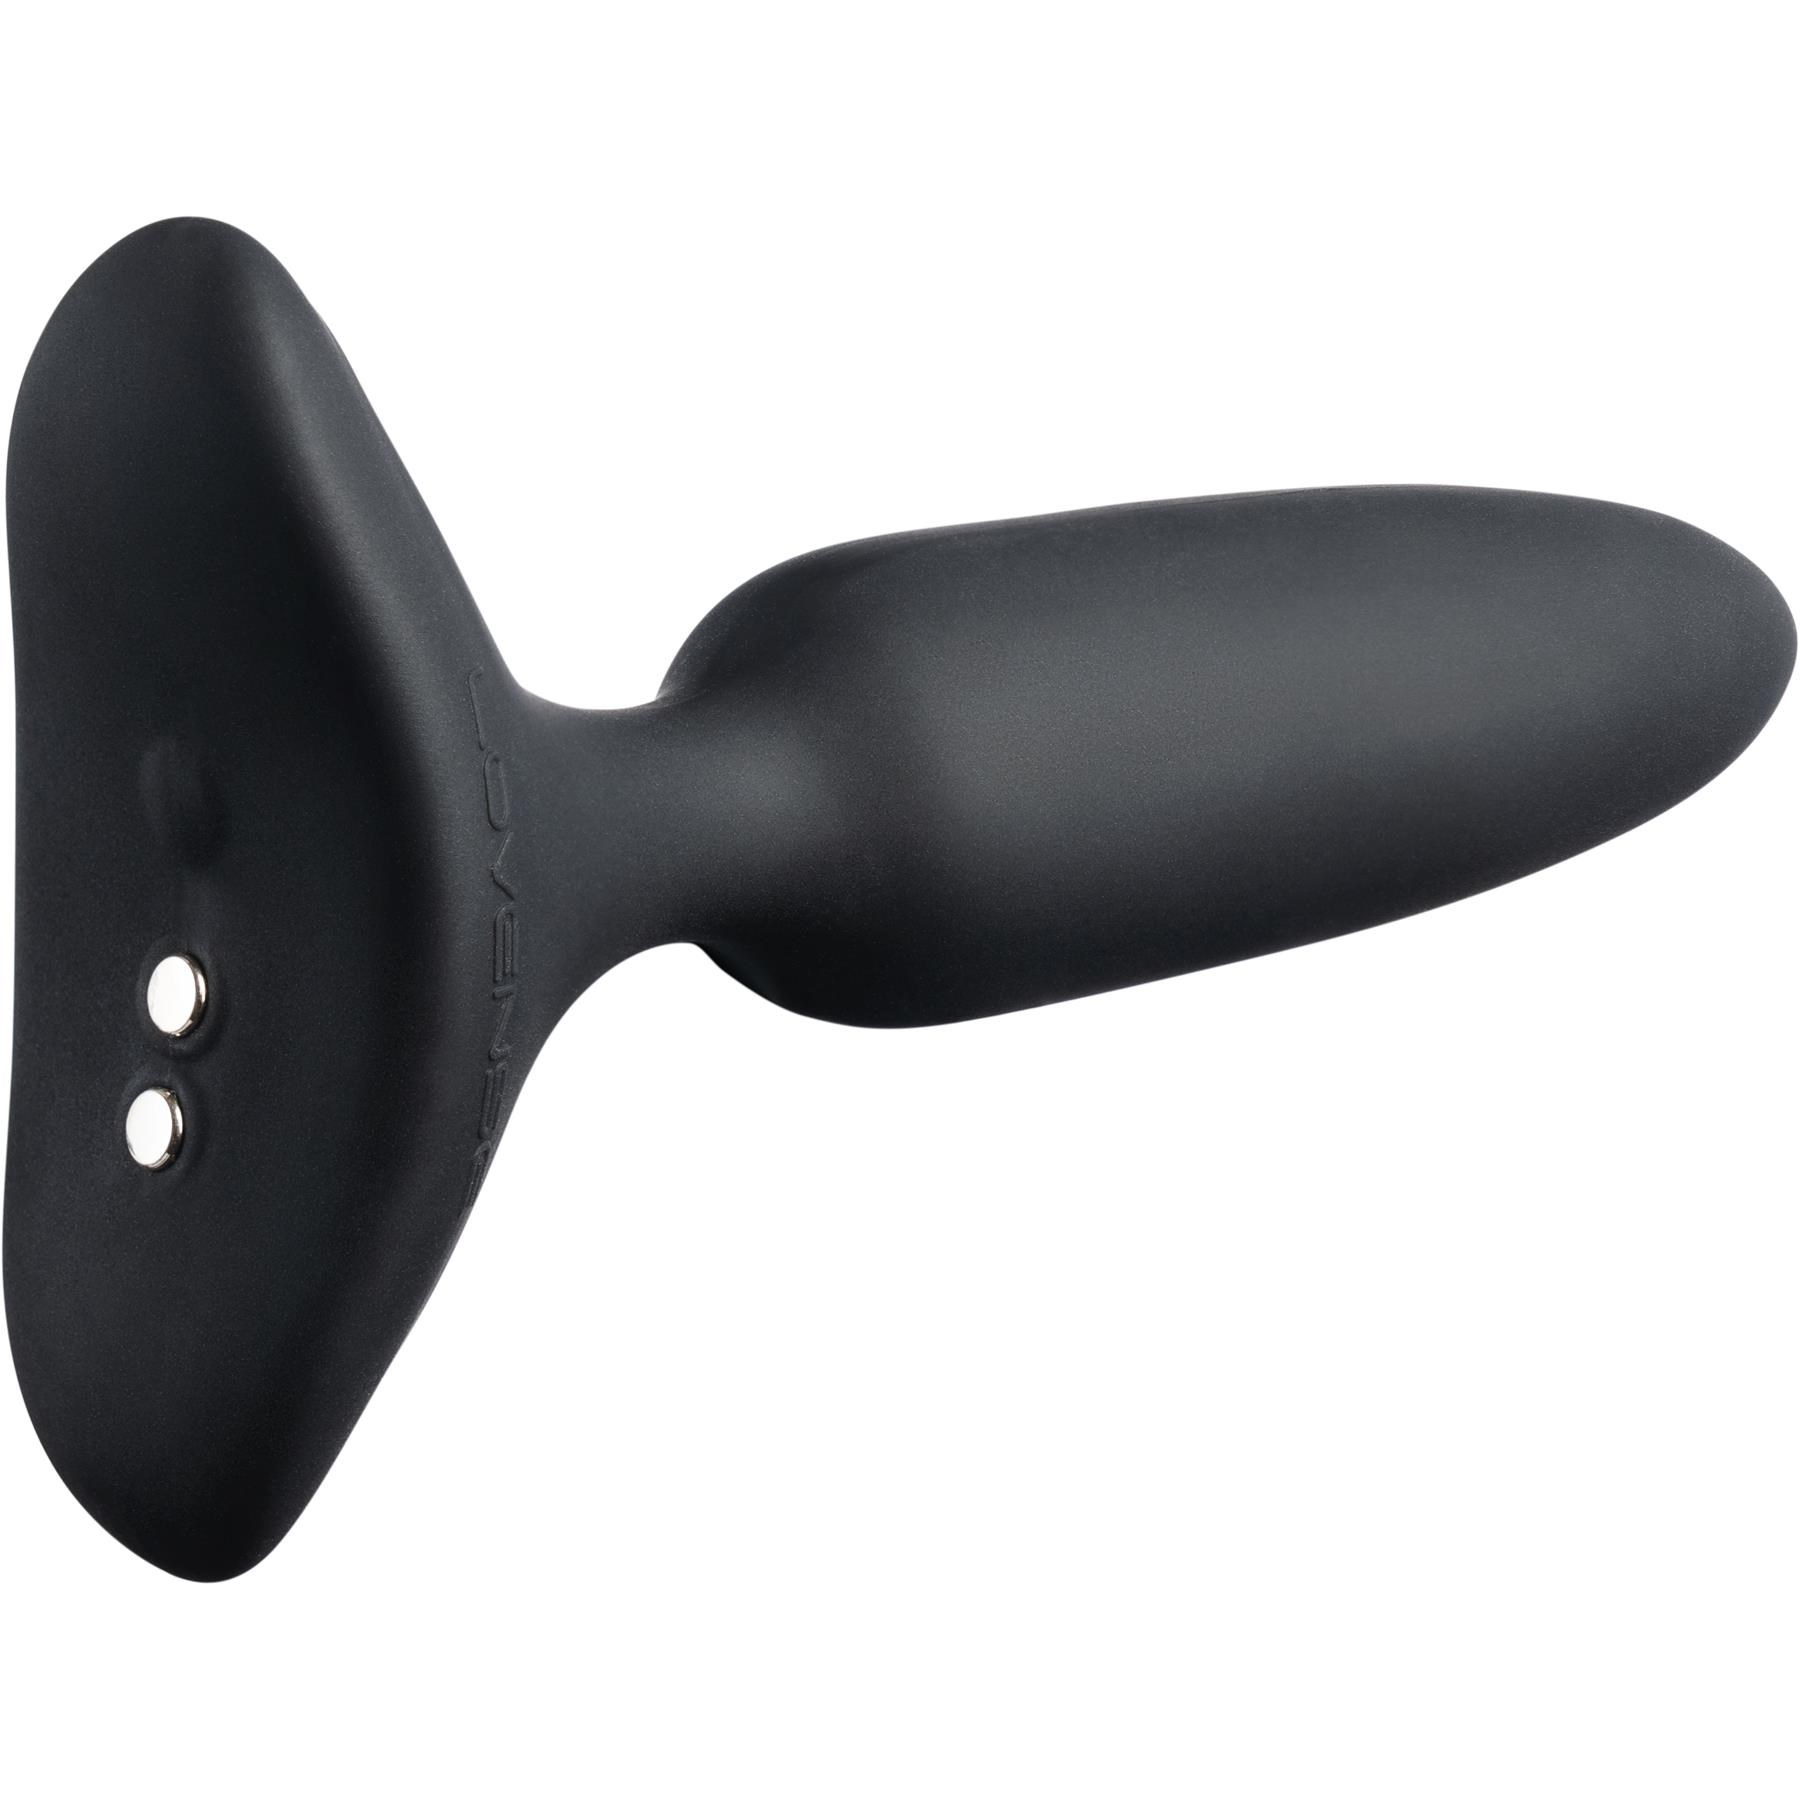 Lovense Hush 2 Bluetooth Vibrating Butt Plug - Showing Base Where Charging Cable is Placed